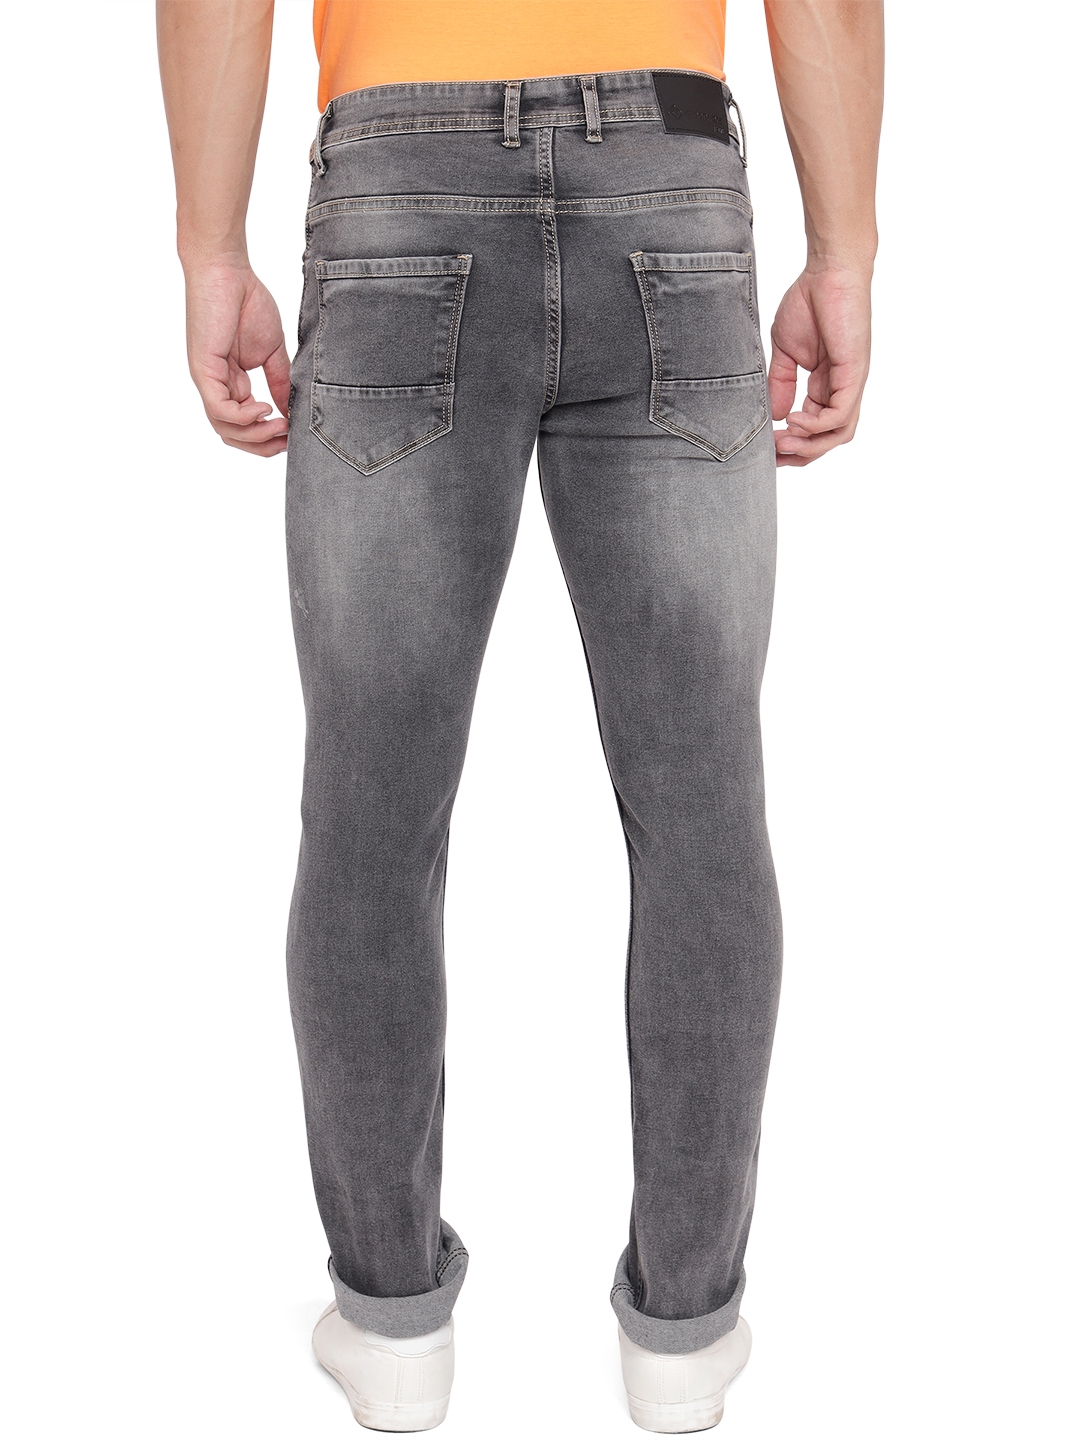 Greenfibre | Forest Grey Solid Narrow Fit Jeans | Greenfibre 2